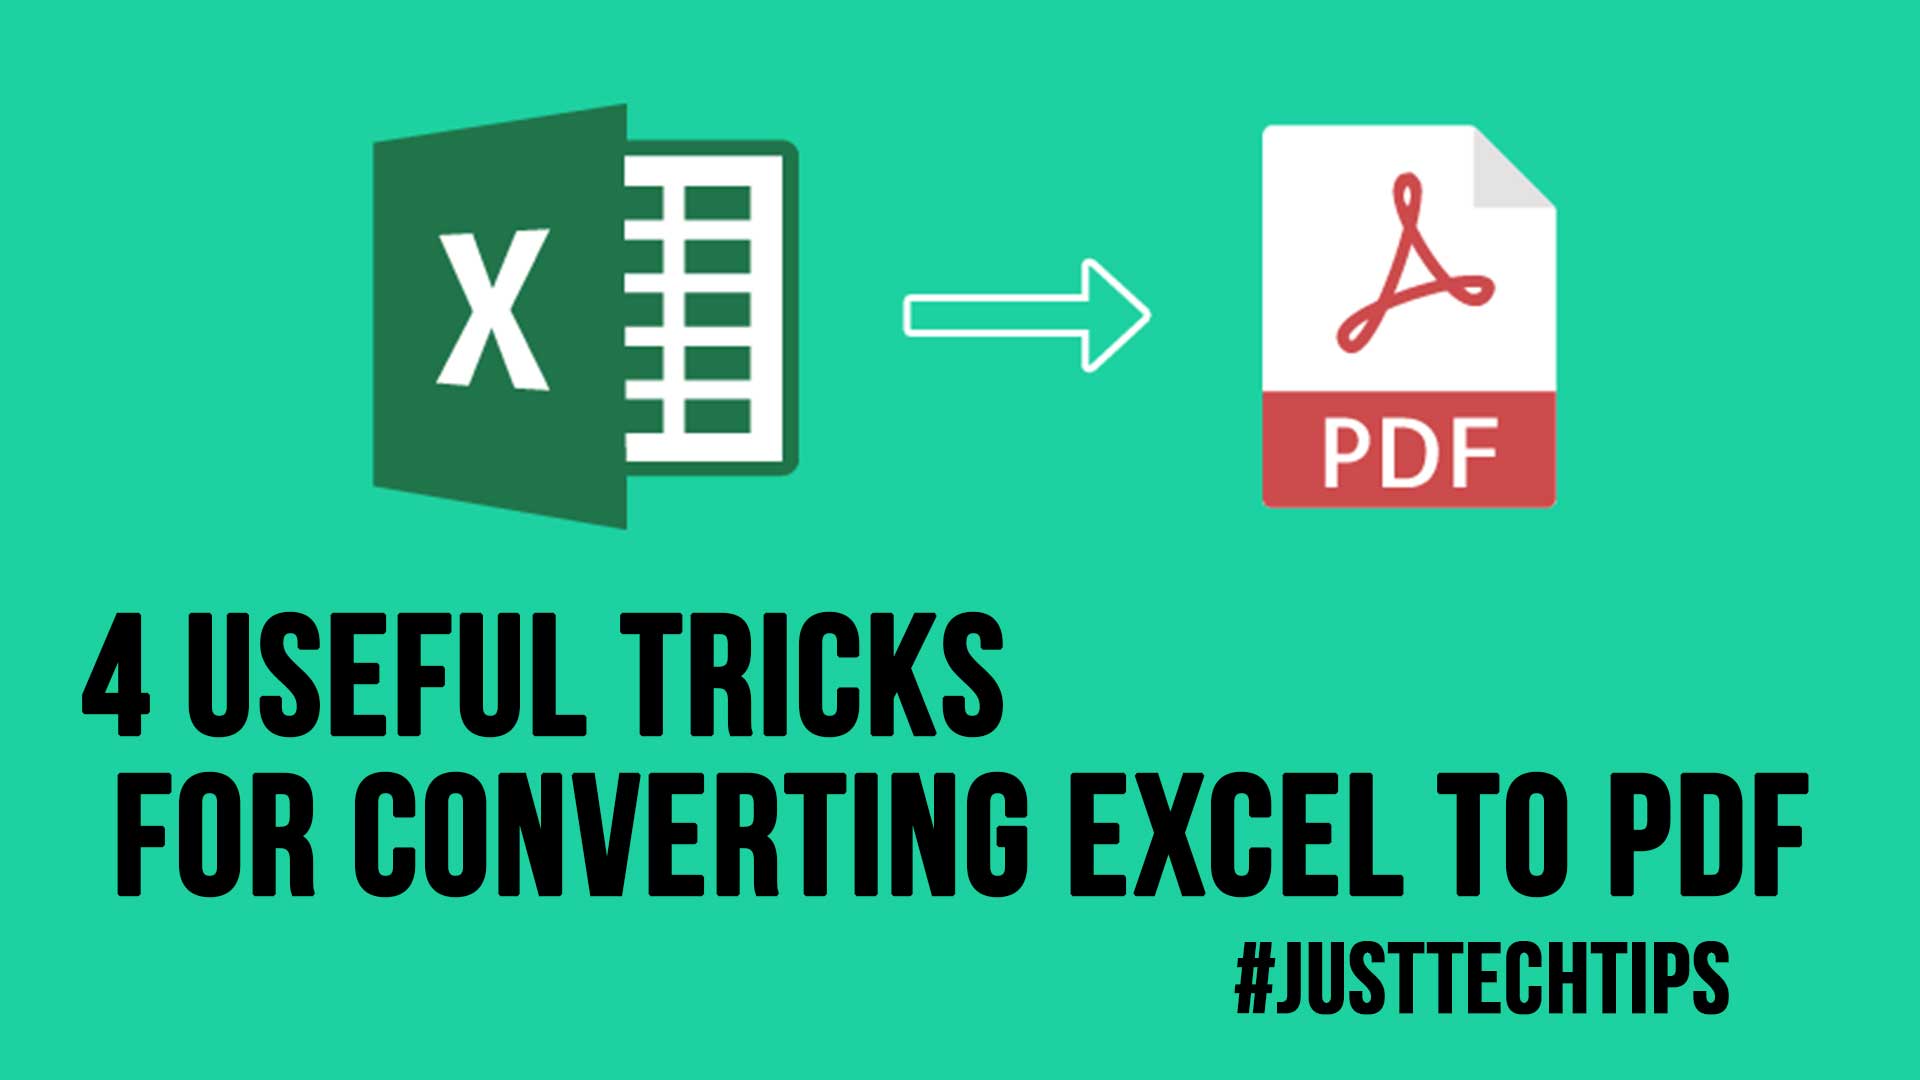 4 Useful Tricks For Converting Excel To PDF